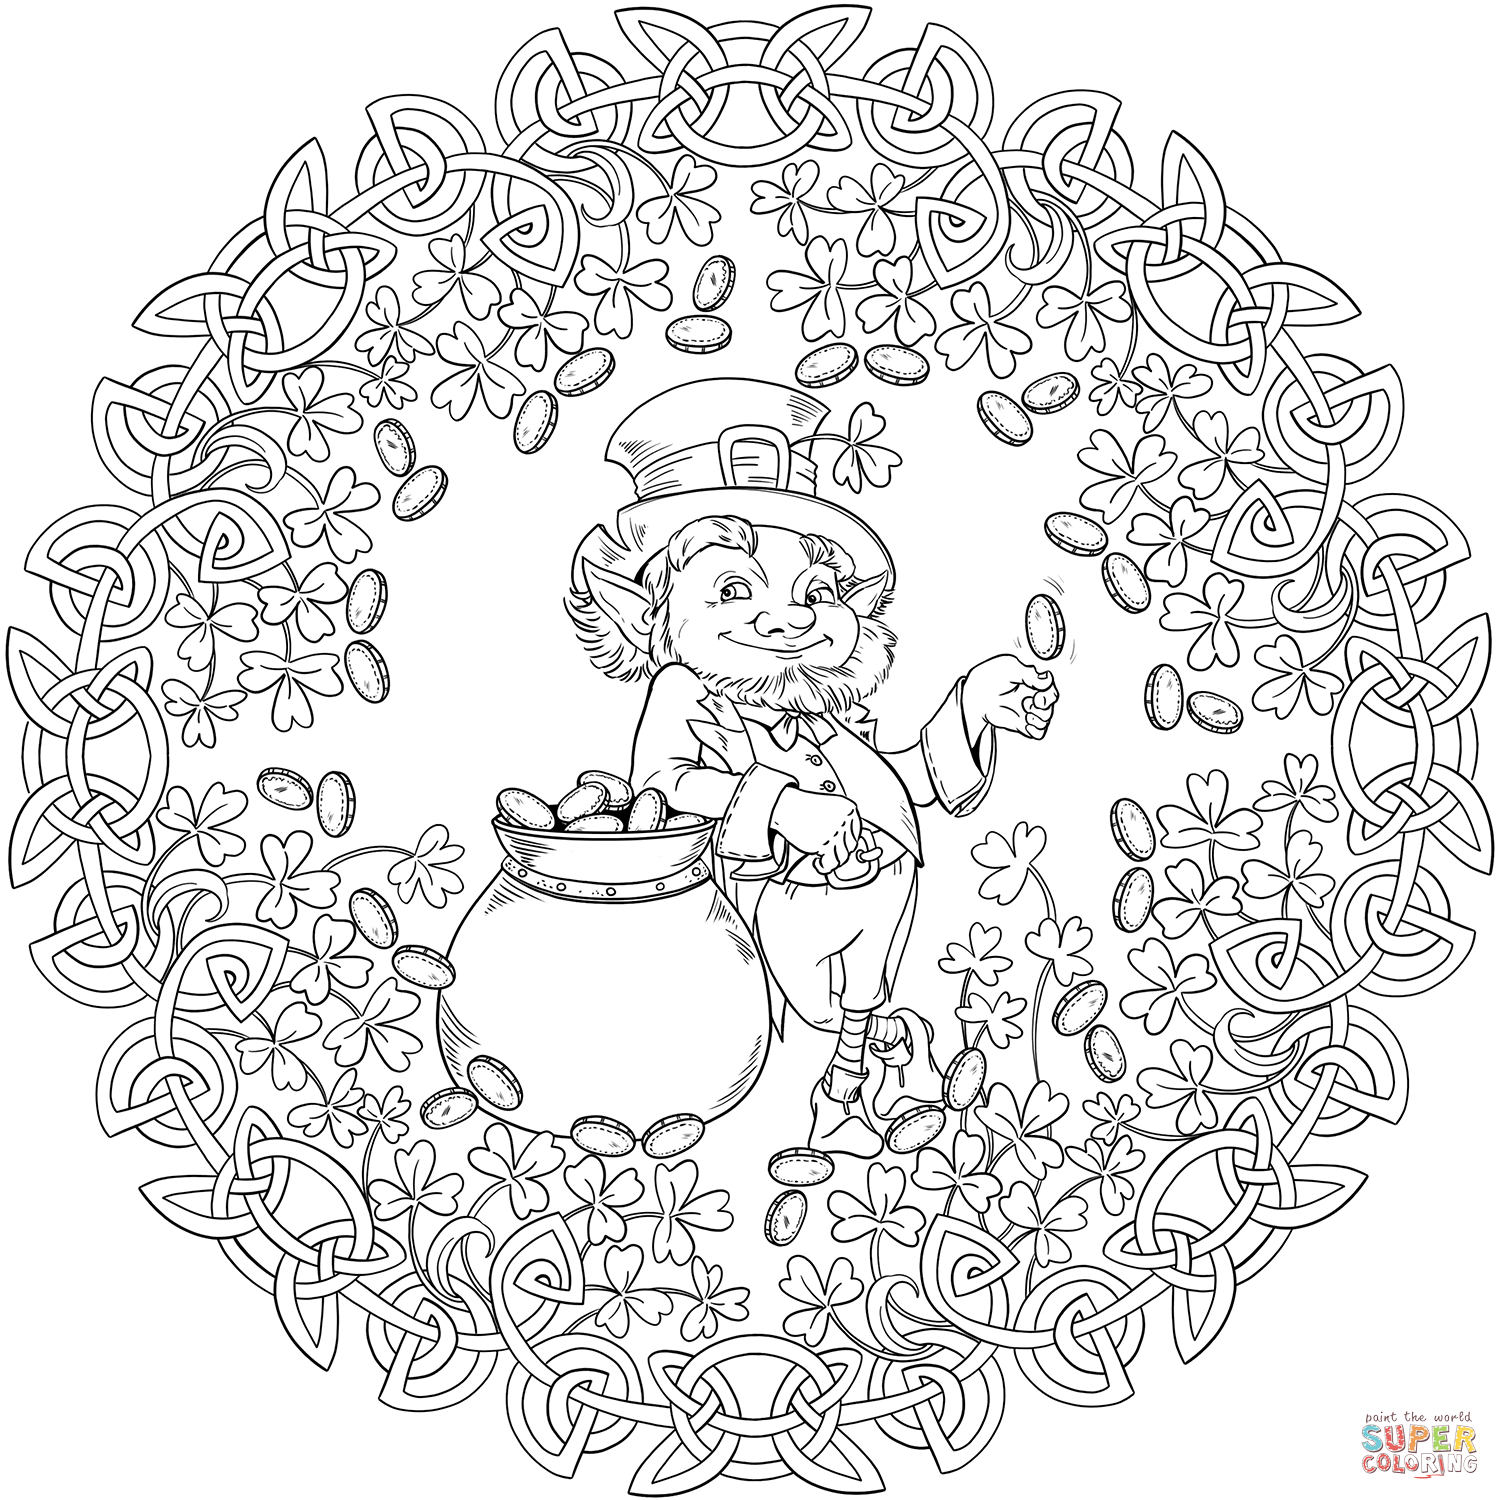 St patricks day mandala with celrtic knot shamrock leprechaun and pot of gold coloring page free printable coloring pages